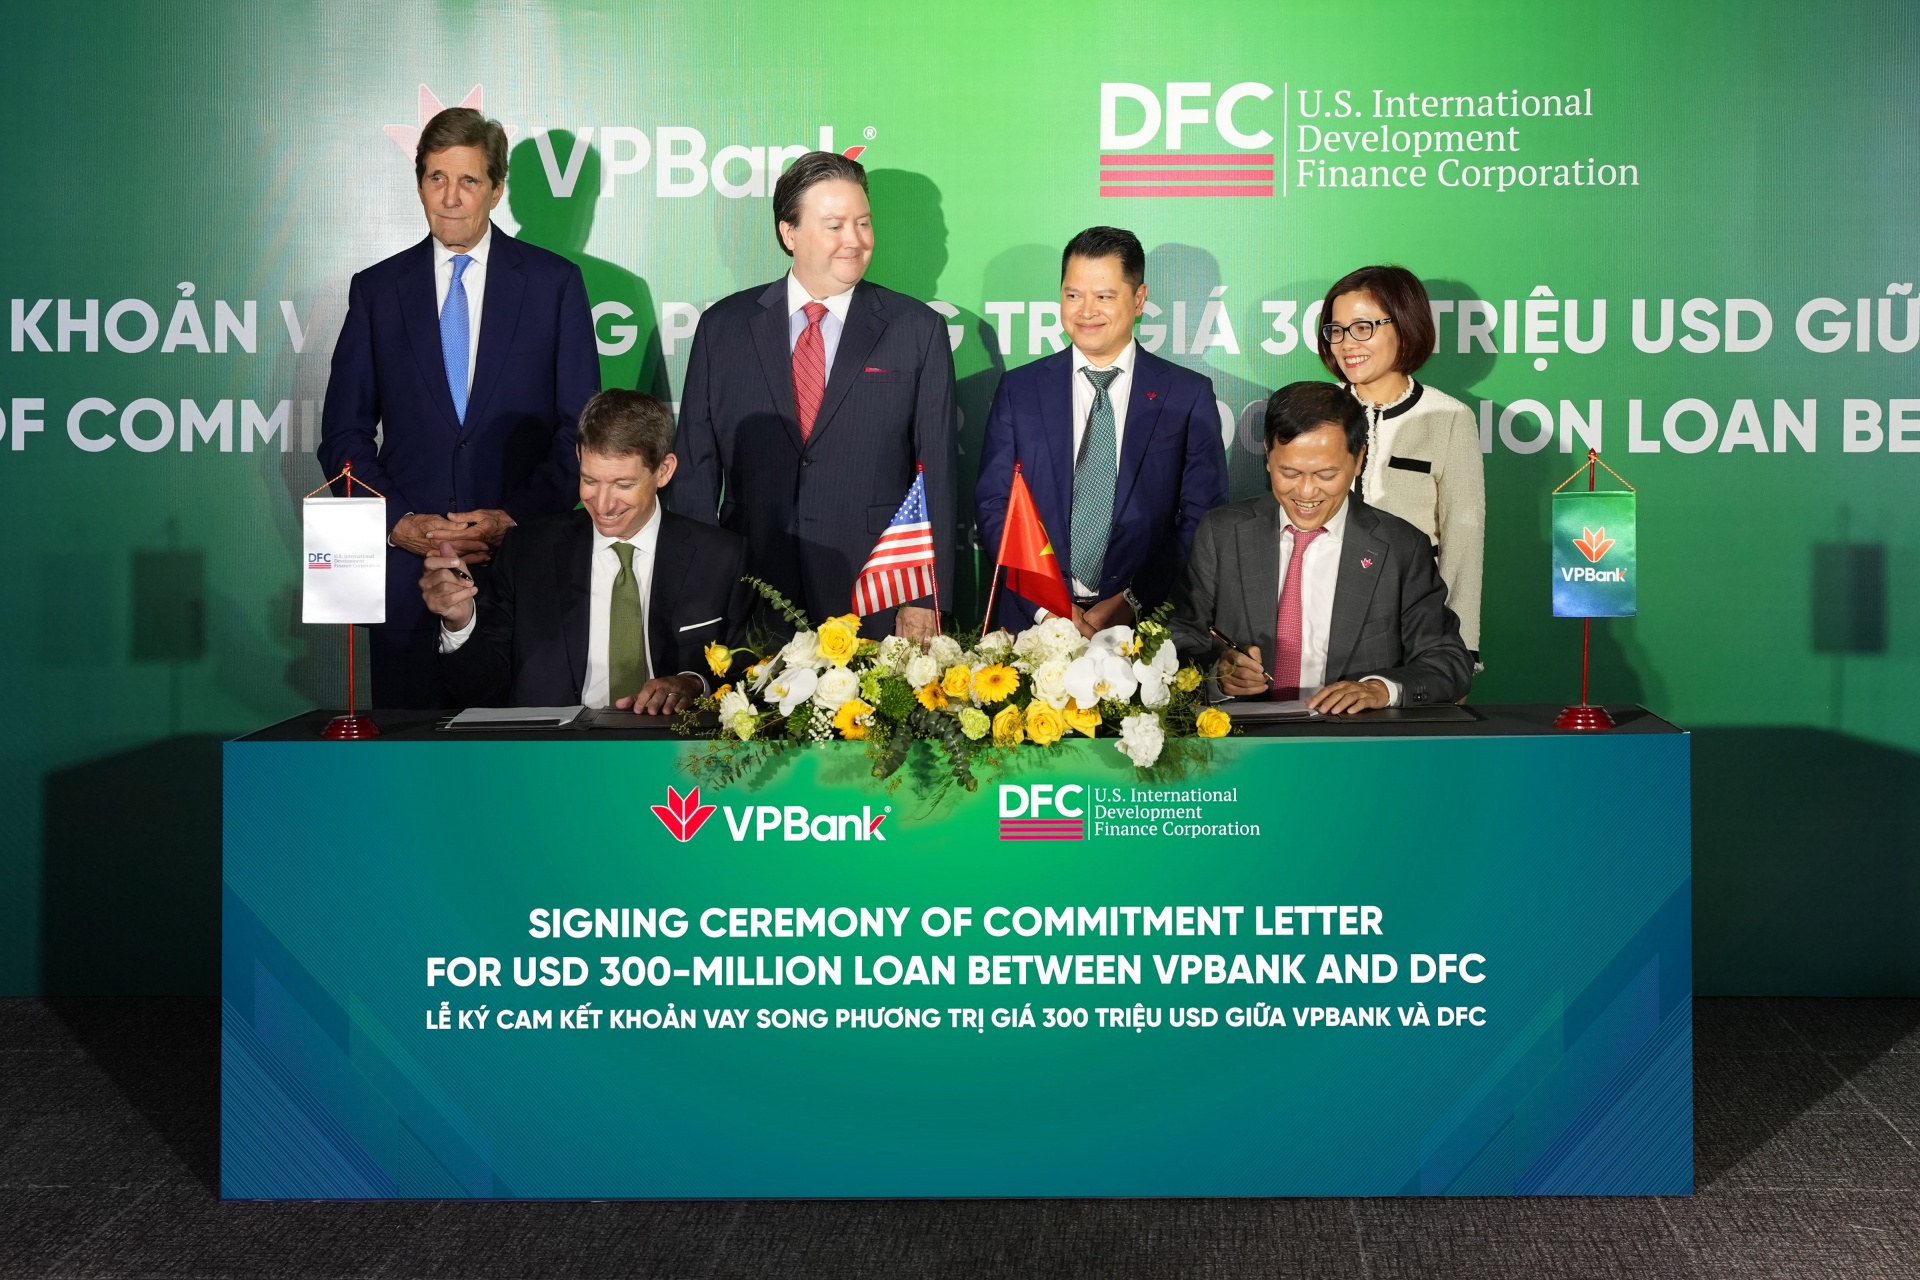 dfc pledges 300 million bilateral loan to vpbank for sustainable finance